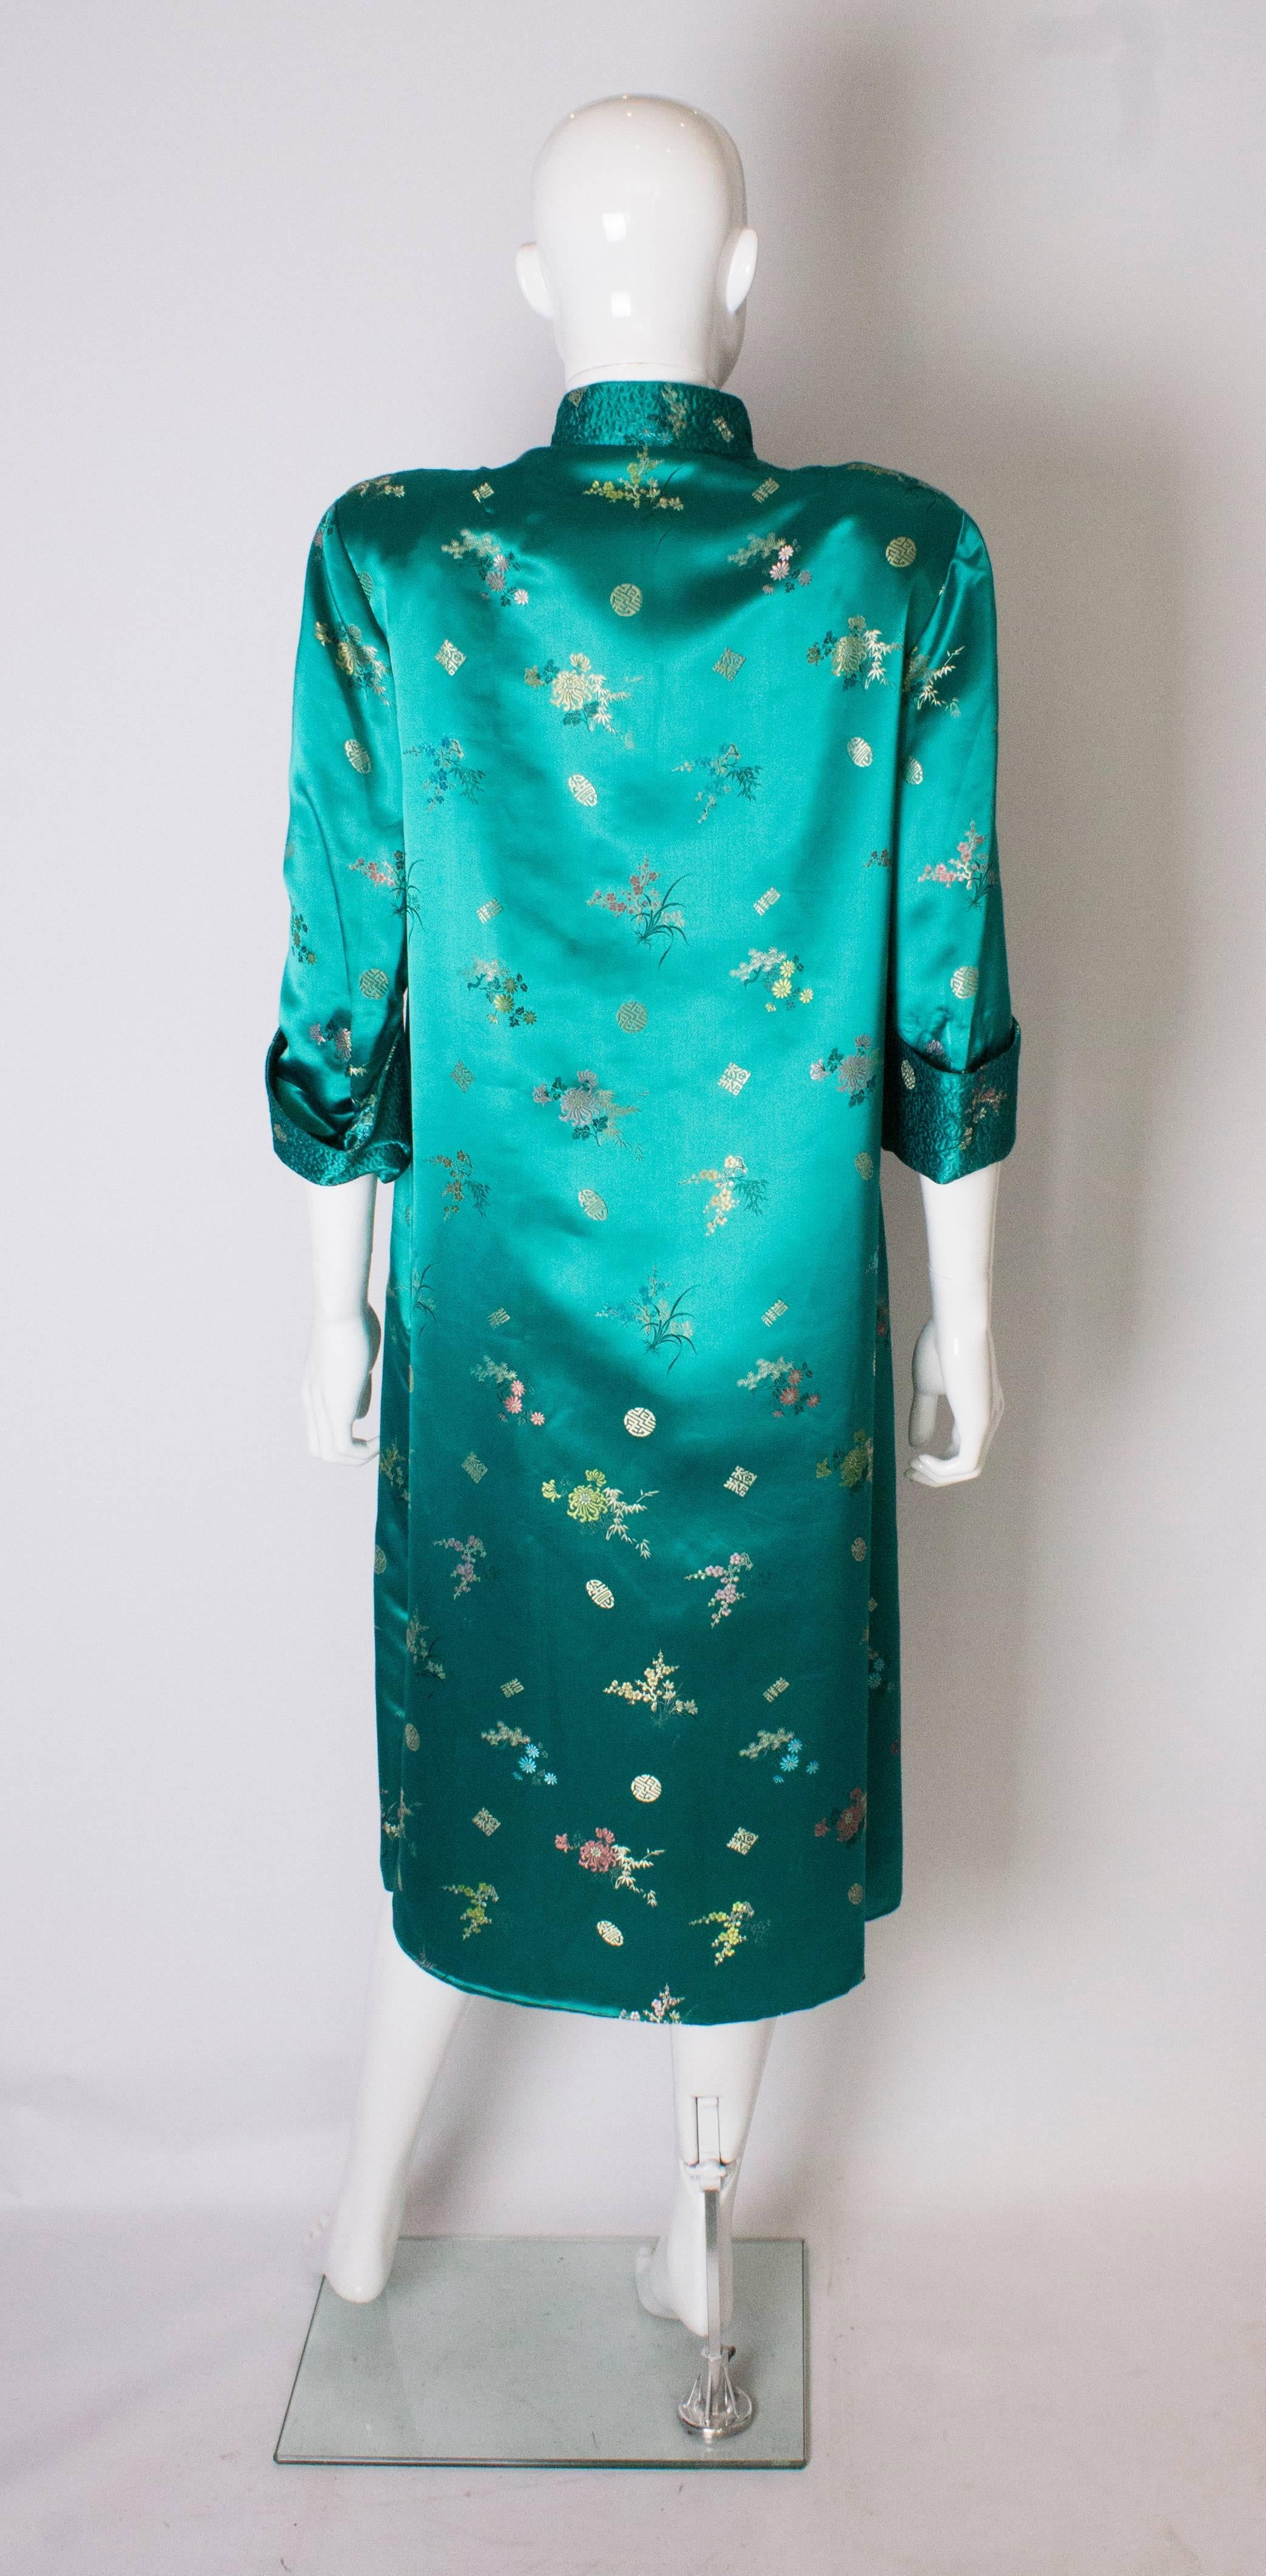 A Vintage 1970s turquoise Chinese Coat with Standup Collar & Decorative Pockets 2